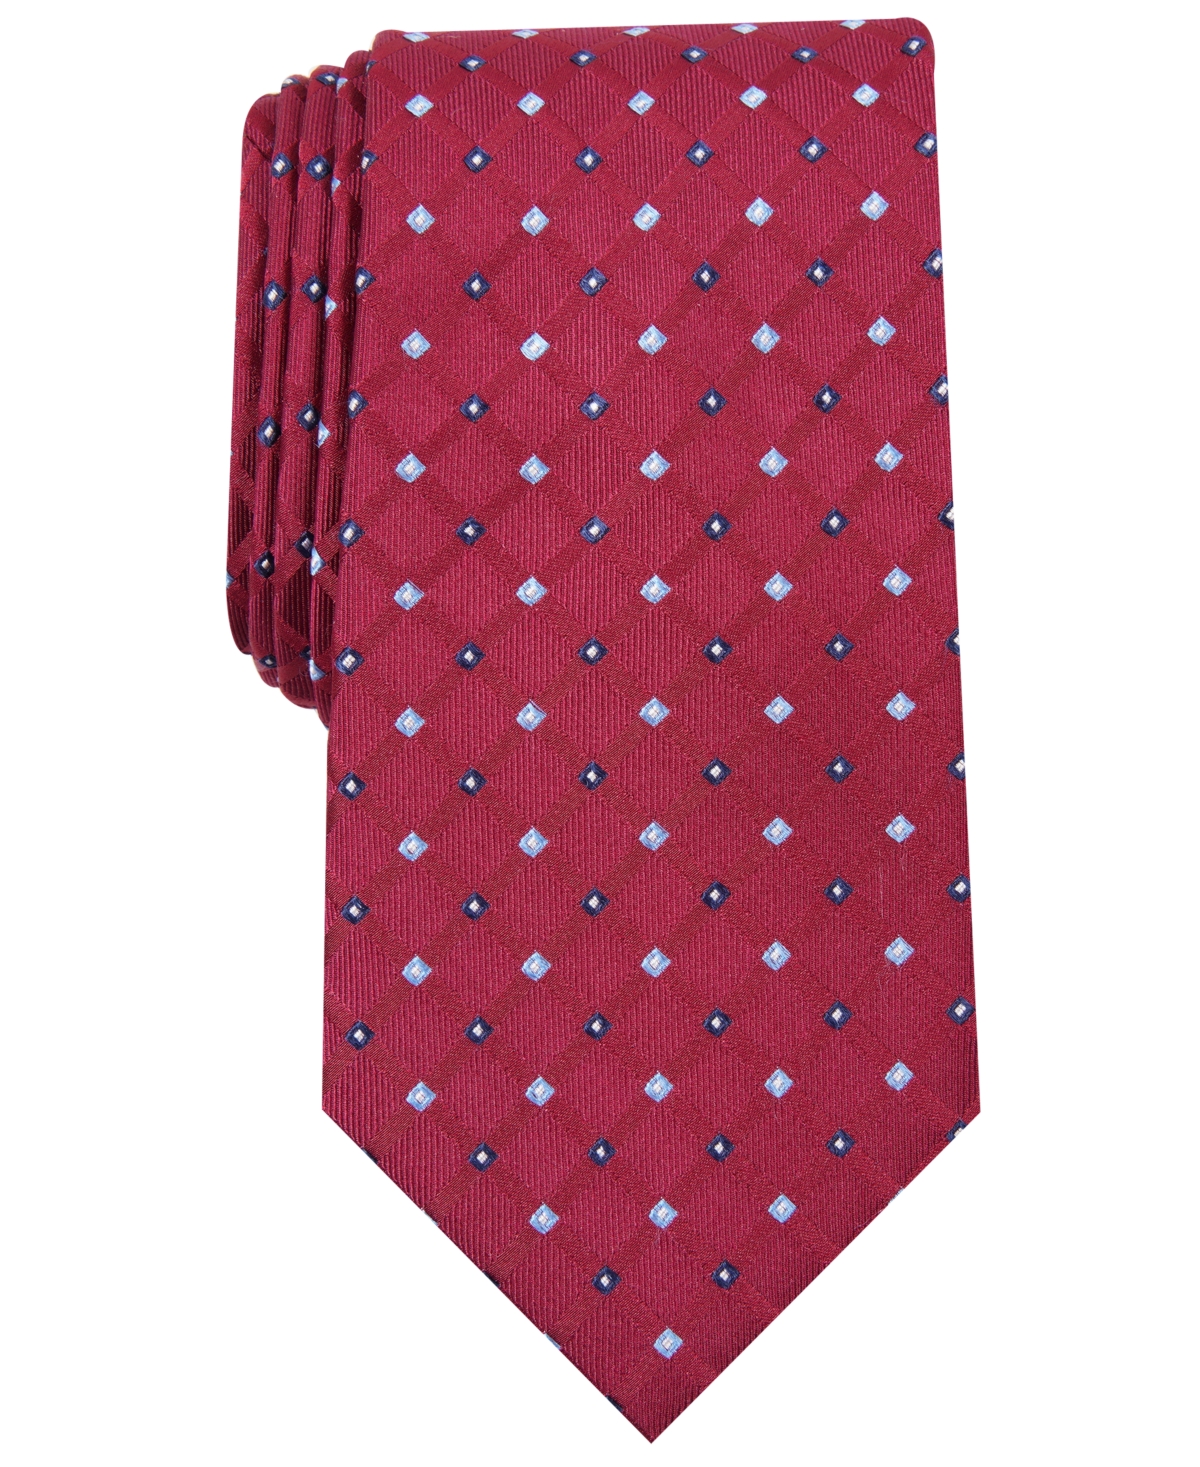 Men's Linked Neat Tie, Created for Macy's - Taupe